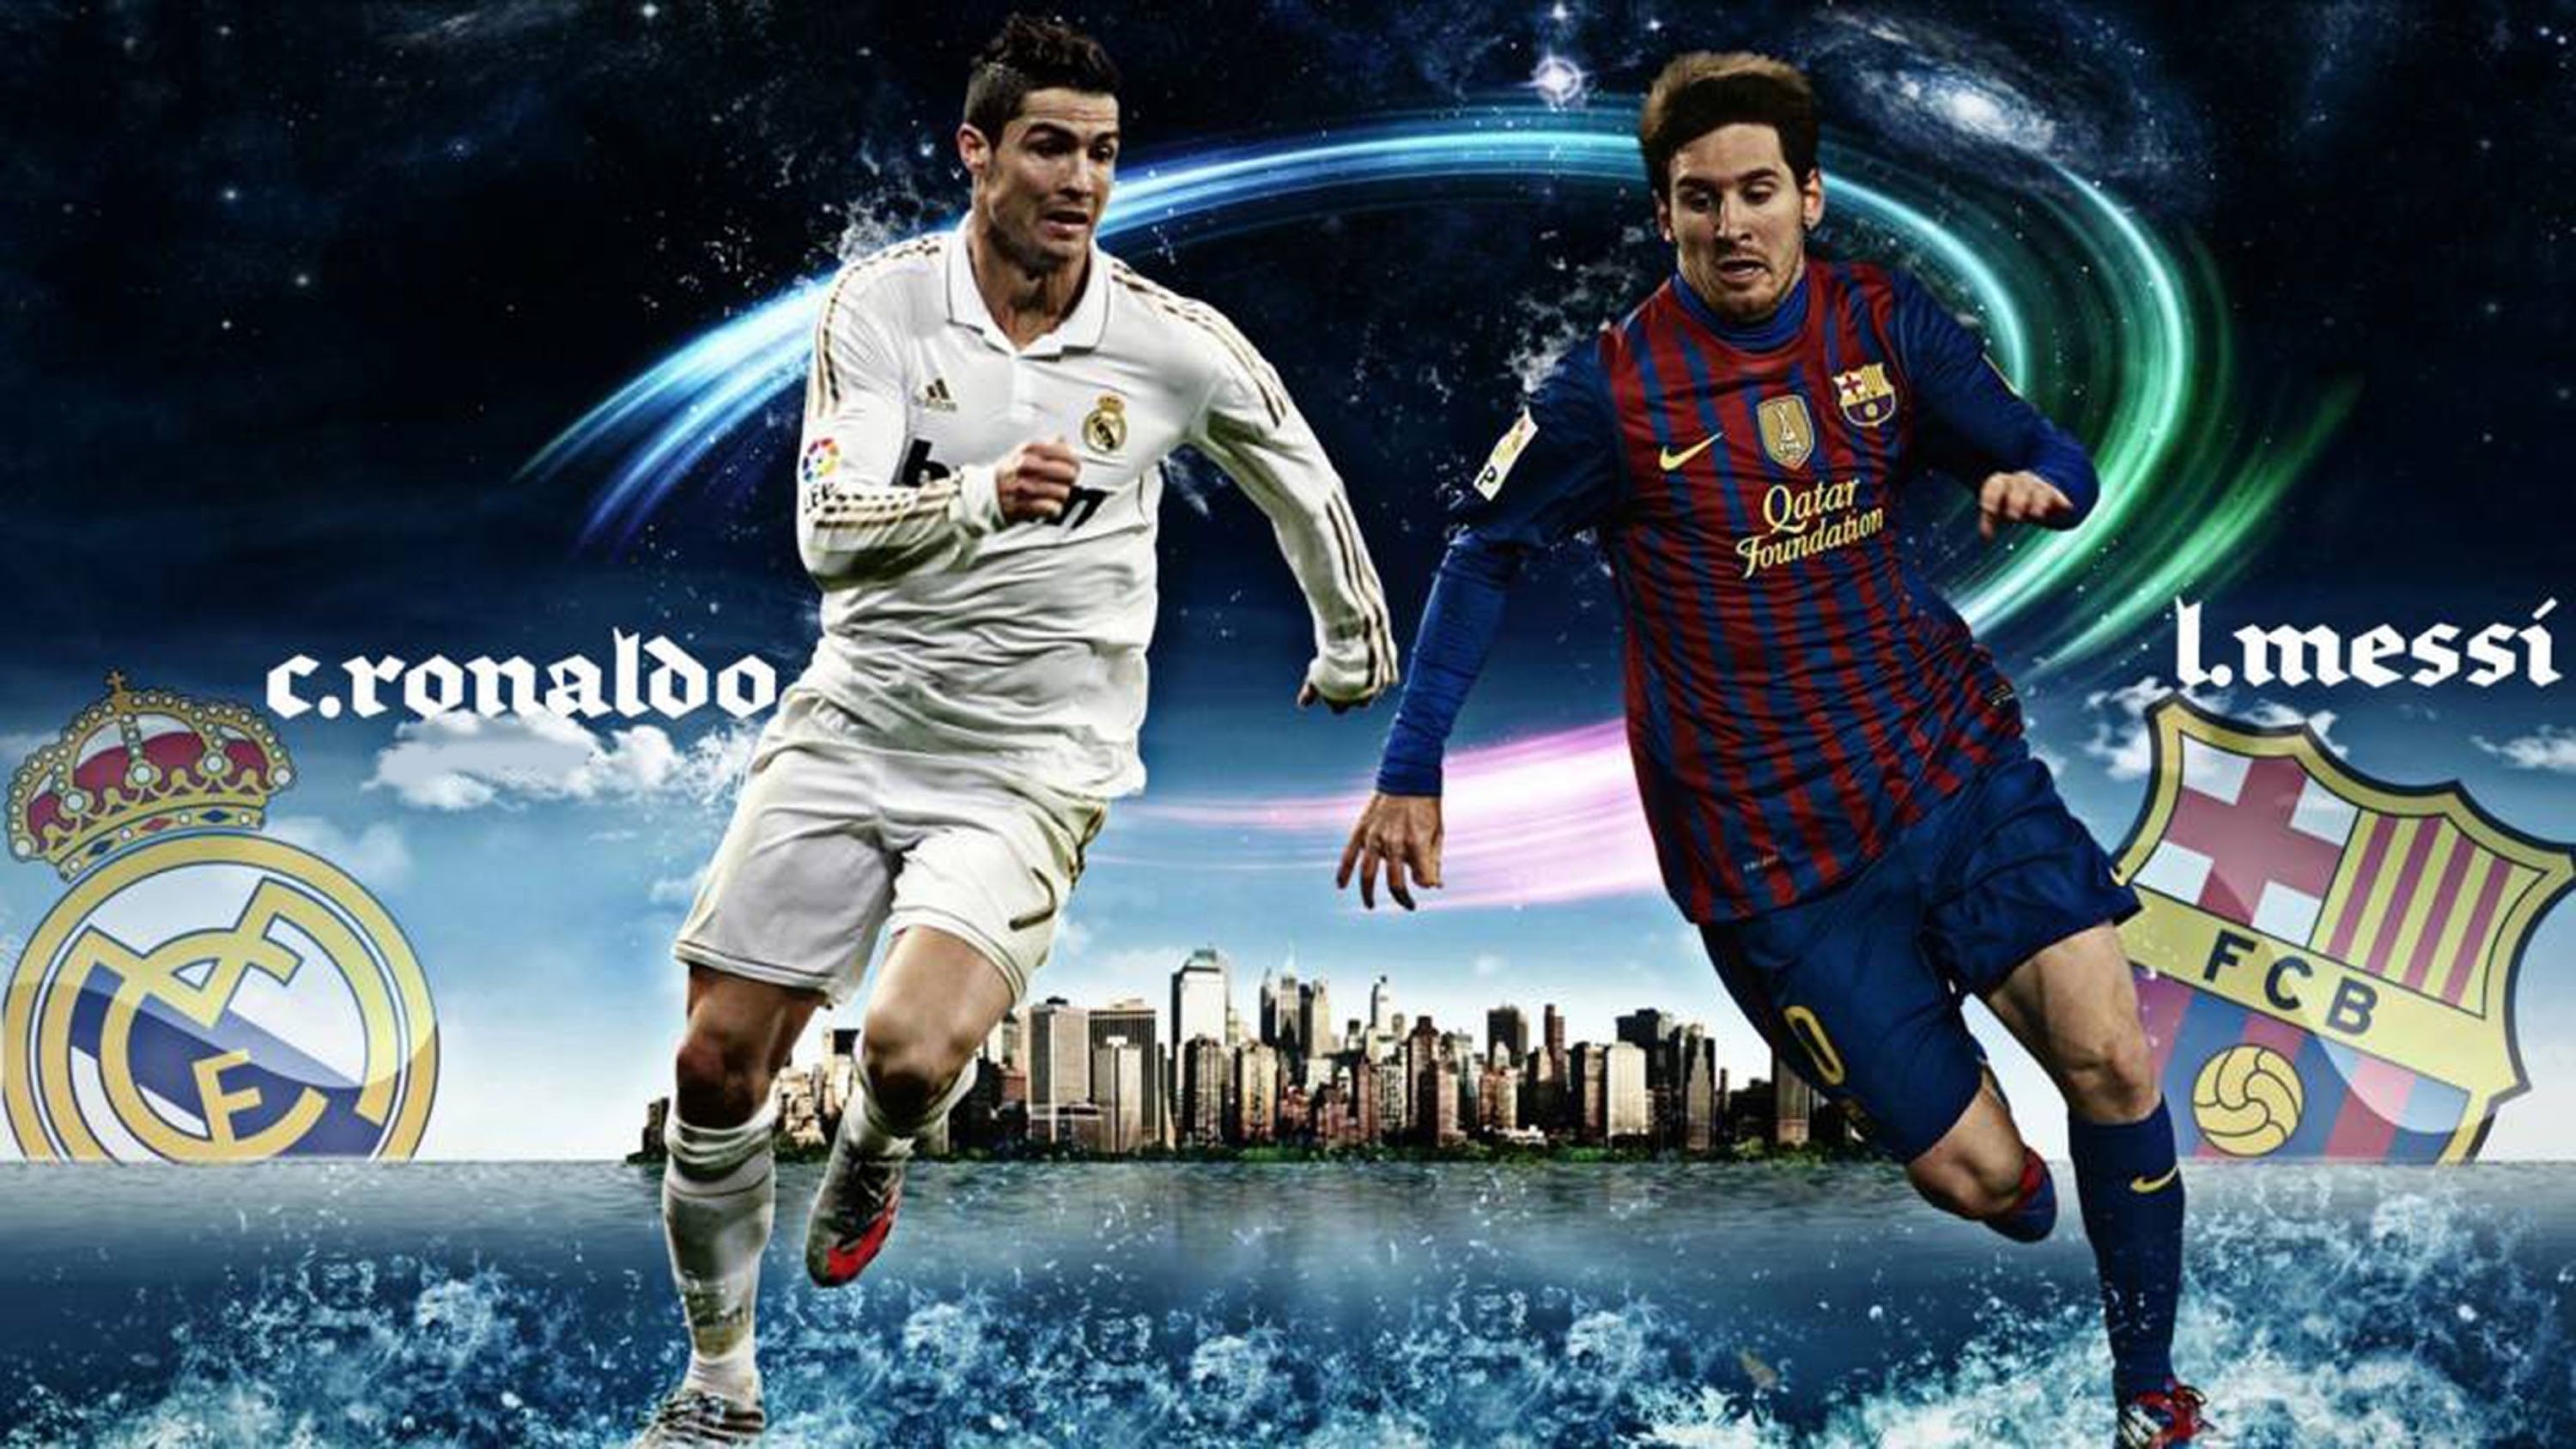 3000x1688 Ronaldo vs Messi – who is the best?